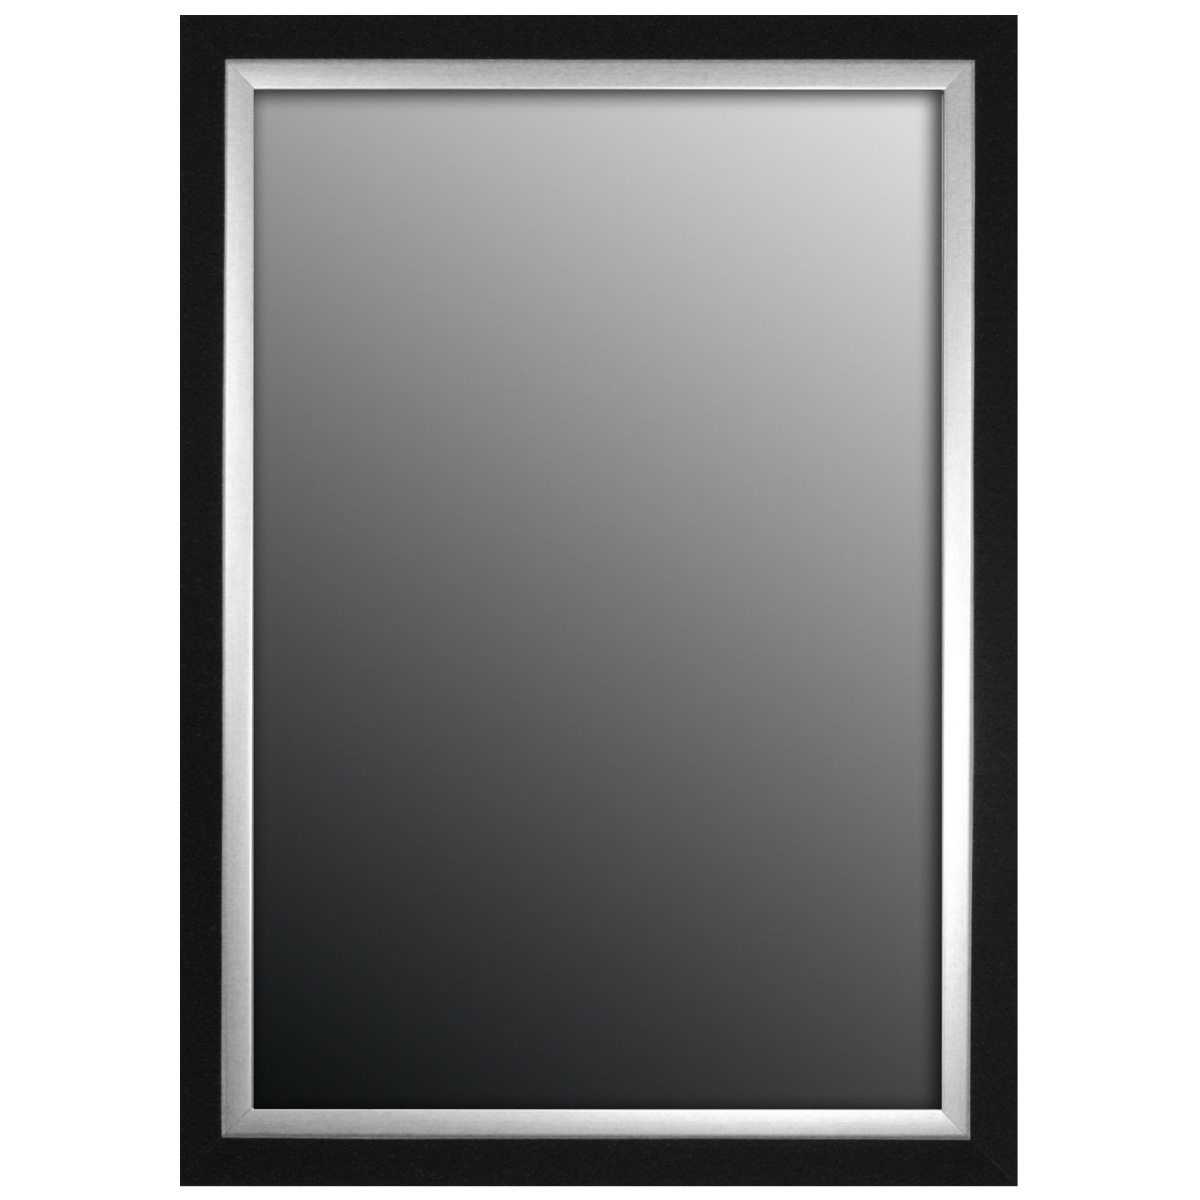 Hitchcock Butterfield 807503 Black & Brushed Nickel Silver Montevideo Natural Wall Mirror - 34.75 X 44.75 In.